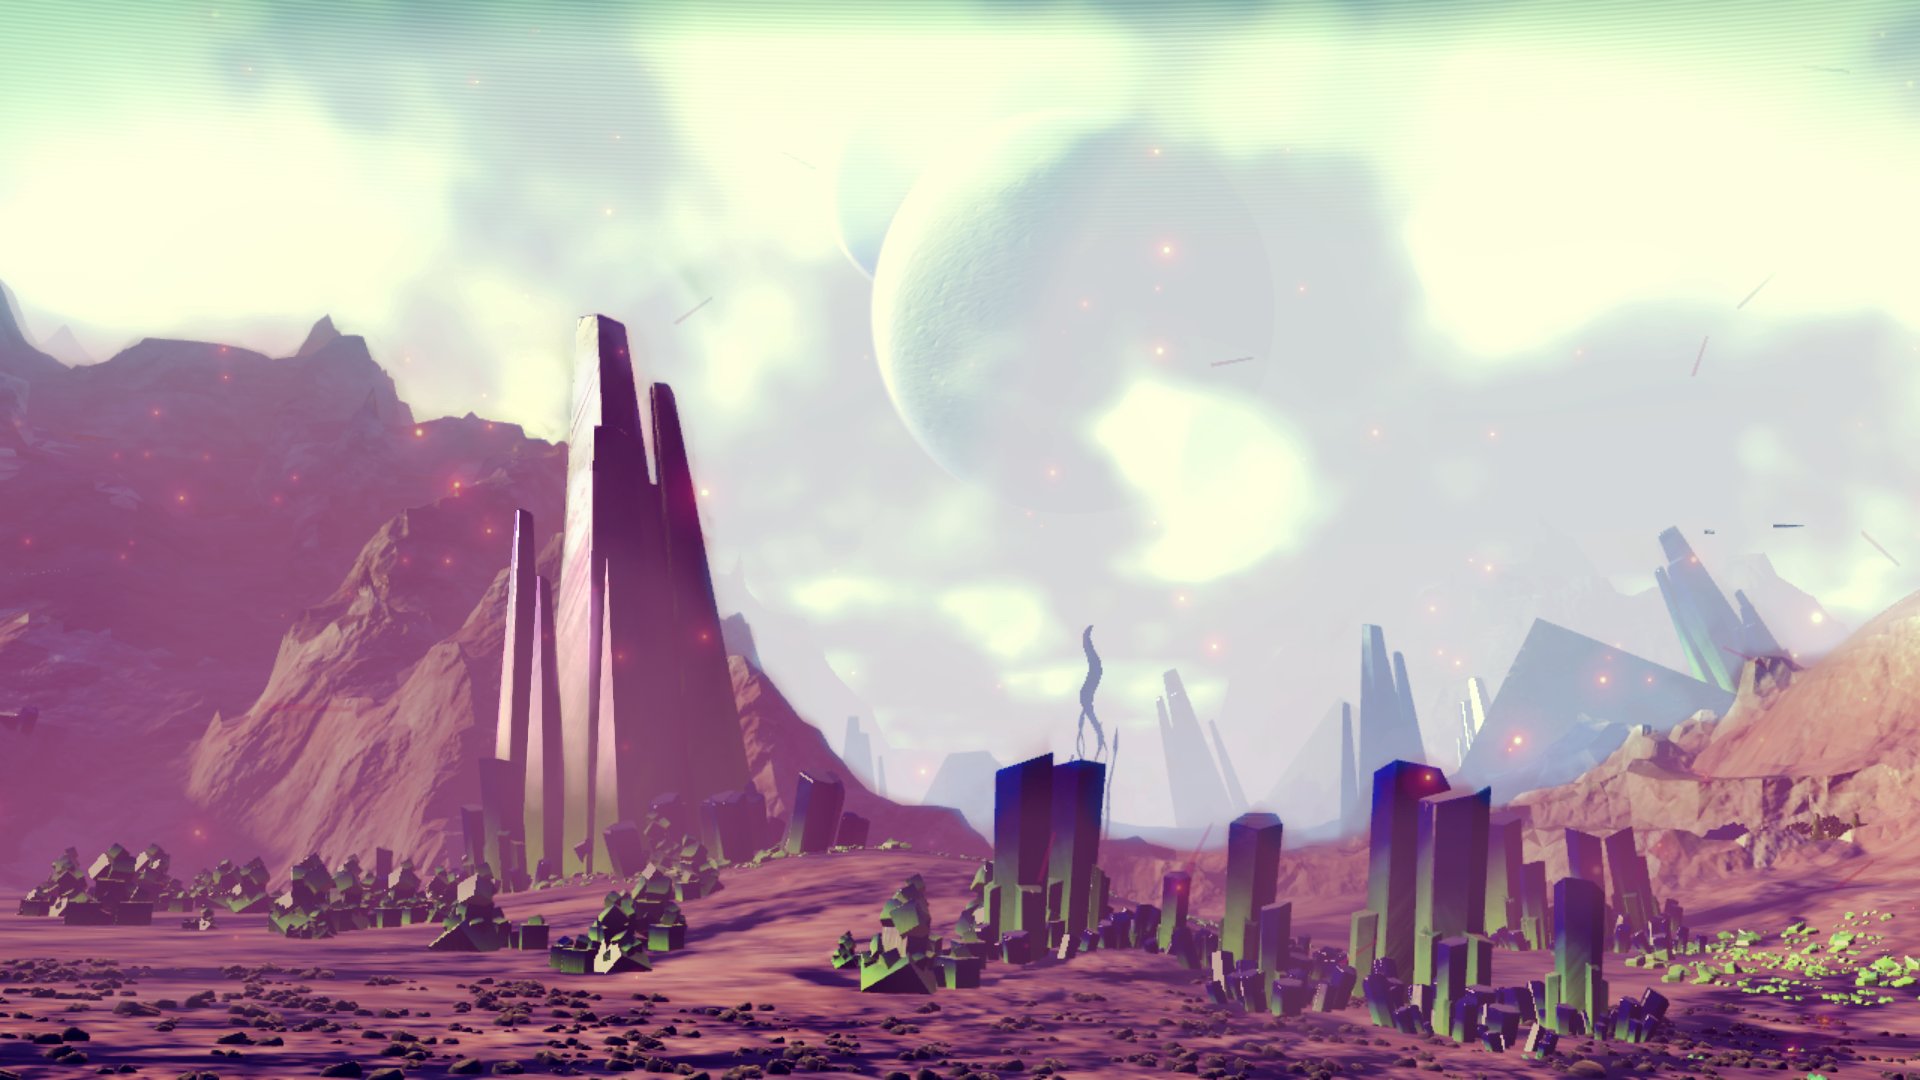 “No Man’s Sky” On PS4 Won’t Require PS Plus - The Chances Of Running Into People Are Very Slim